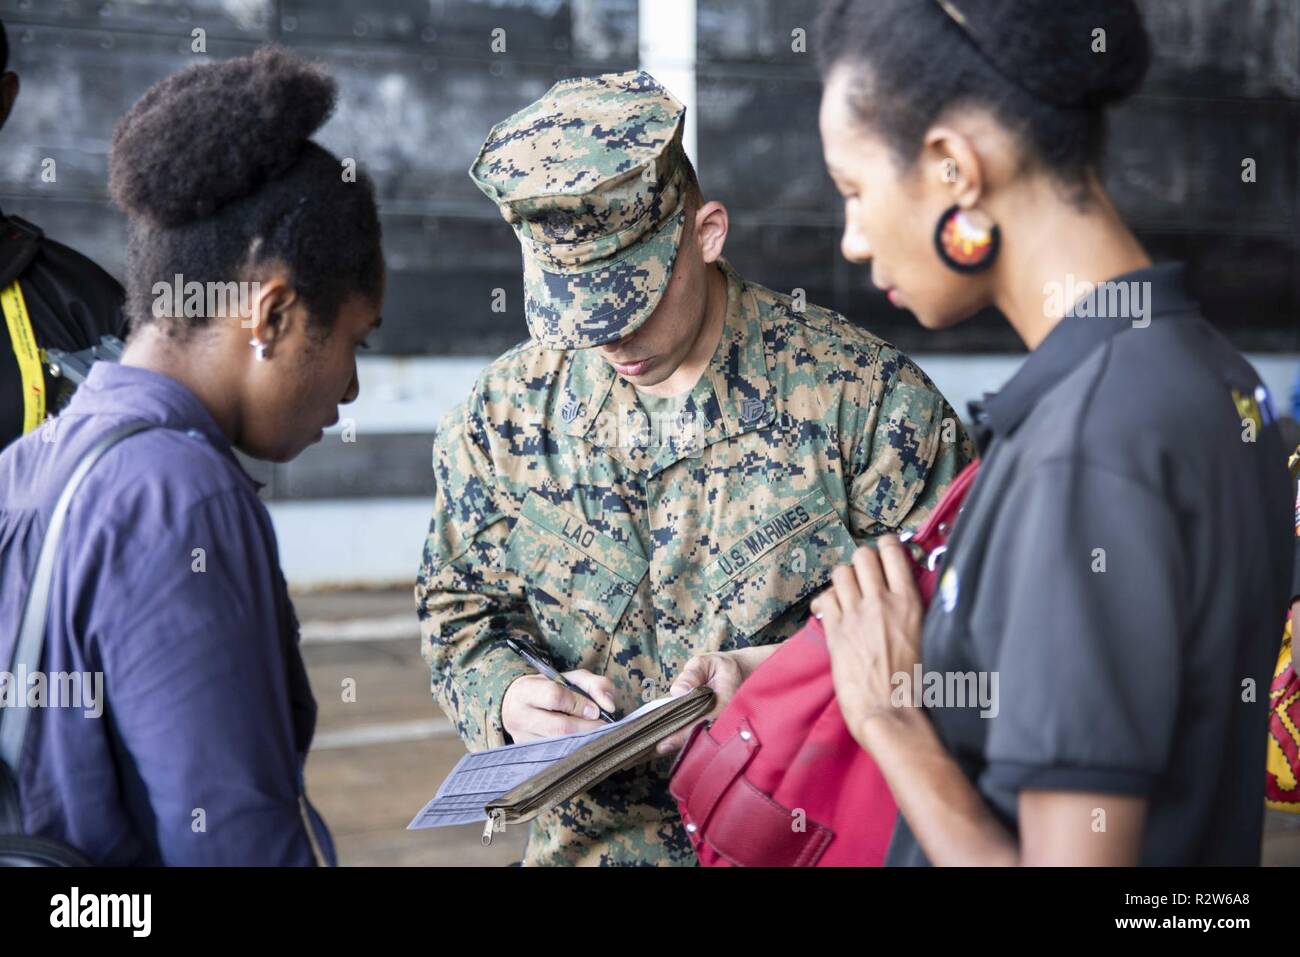 PORT MORESBY, Papua New Guinea (Nov. 14, 2018) Staff Sgt. Armando Lao records the names of arriving local media crew in the well deck of the amphibious transport dock ship USS Green Bay (LPD 20) prior to a press conference with Rear Adm. Brad Cooper, commander of Amphibious Force 7th Fleet. Green Bay is in Port Moresby preparing to assist with security efforts ahead of the Asia-Pacific Economic Cooperation (APEC) conference and is the second U.S. ship to visit Port Moresby in the last two months. Green Bay is part of Amphibious Squadron 11 and is operating in the region to enhance interoperabi Stock Photo